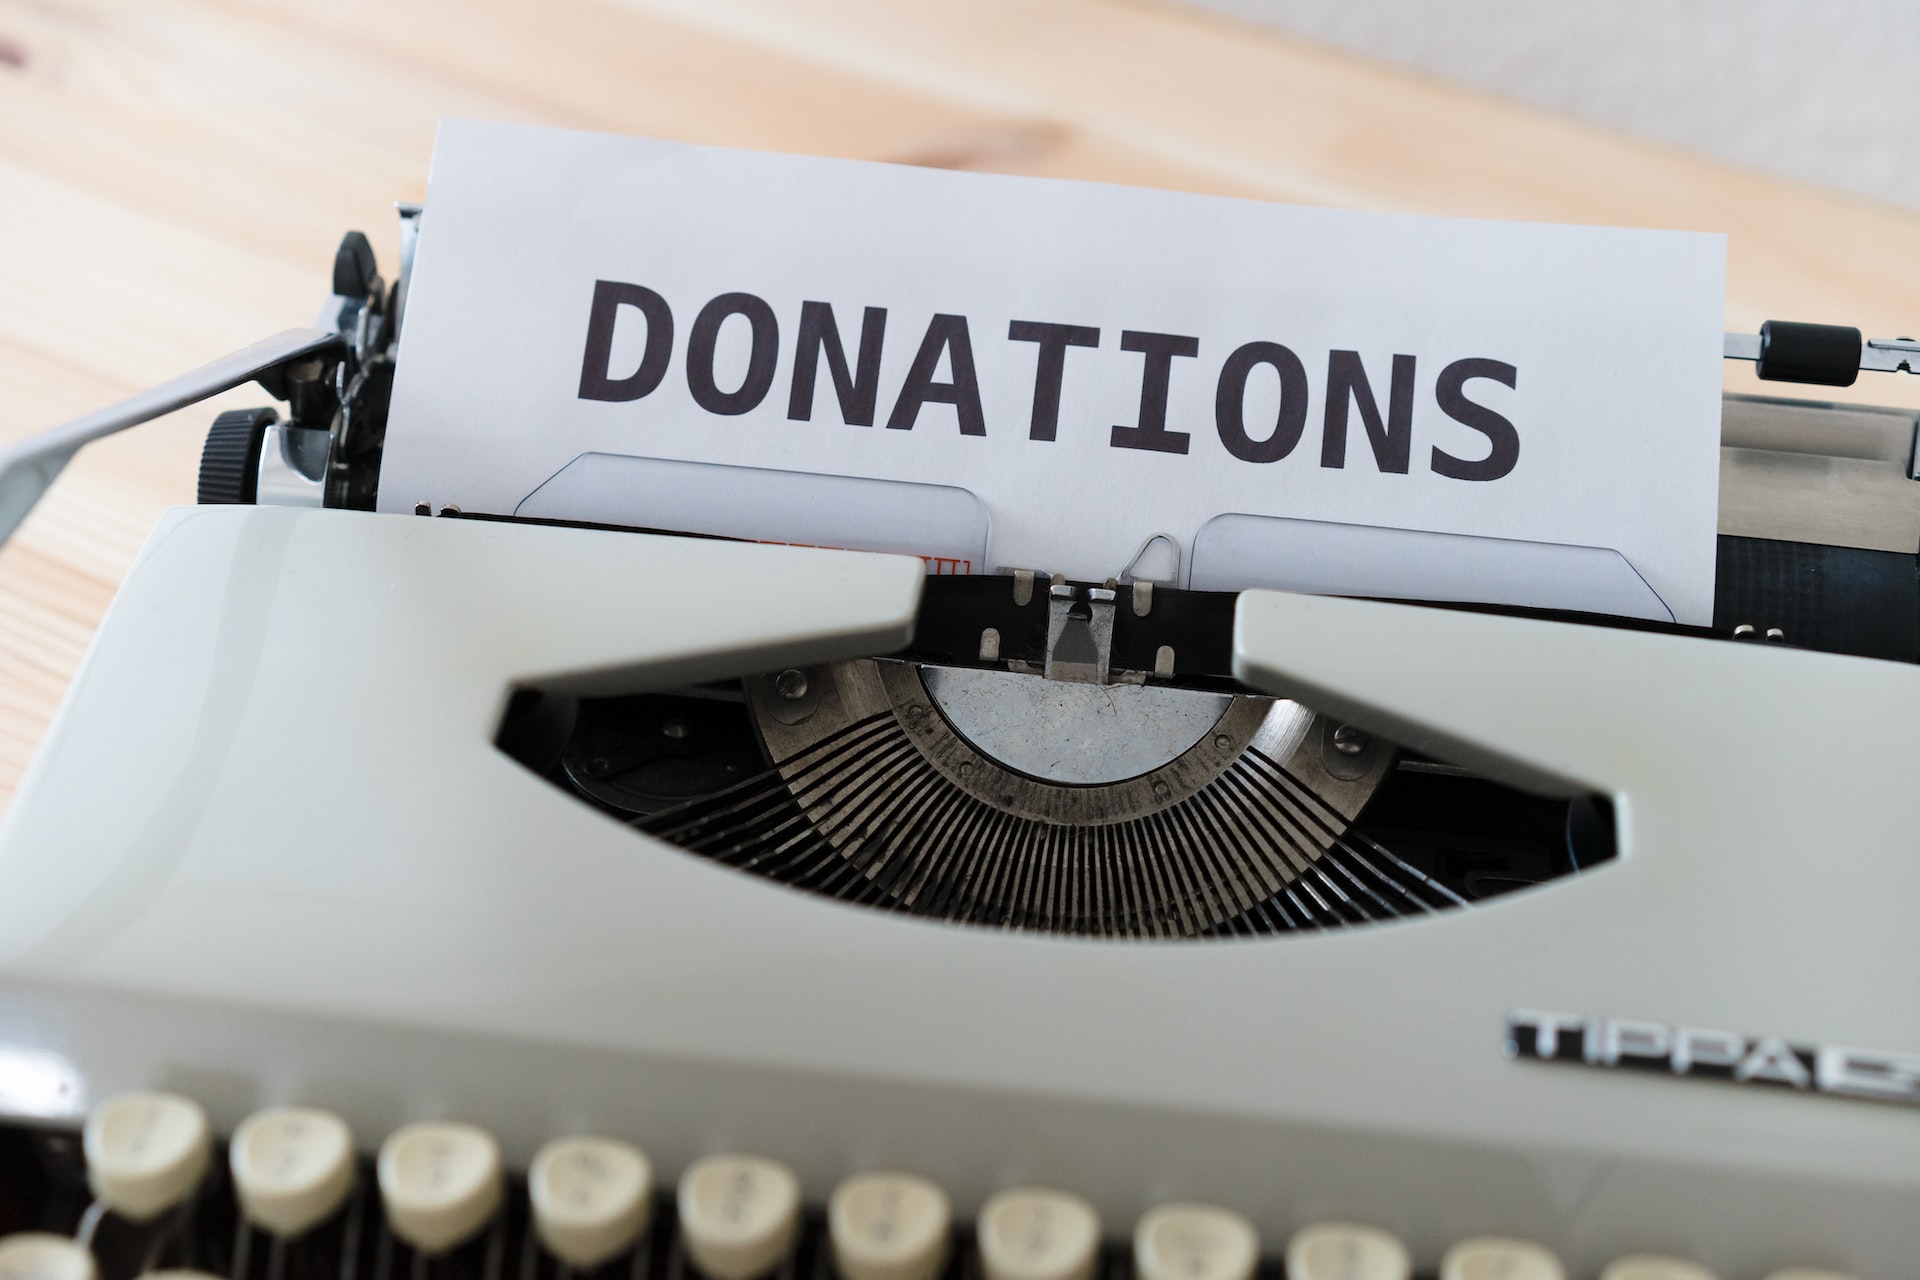 Donations are Printed on Paper using a typewriter